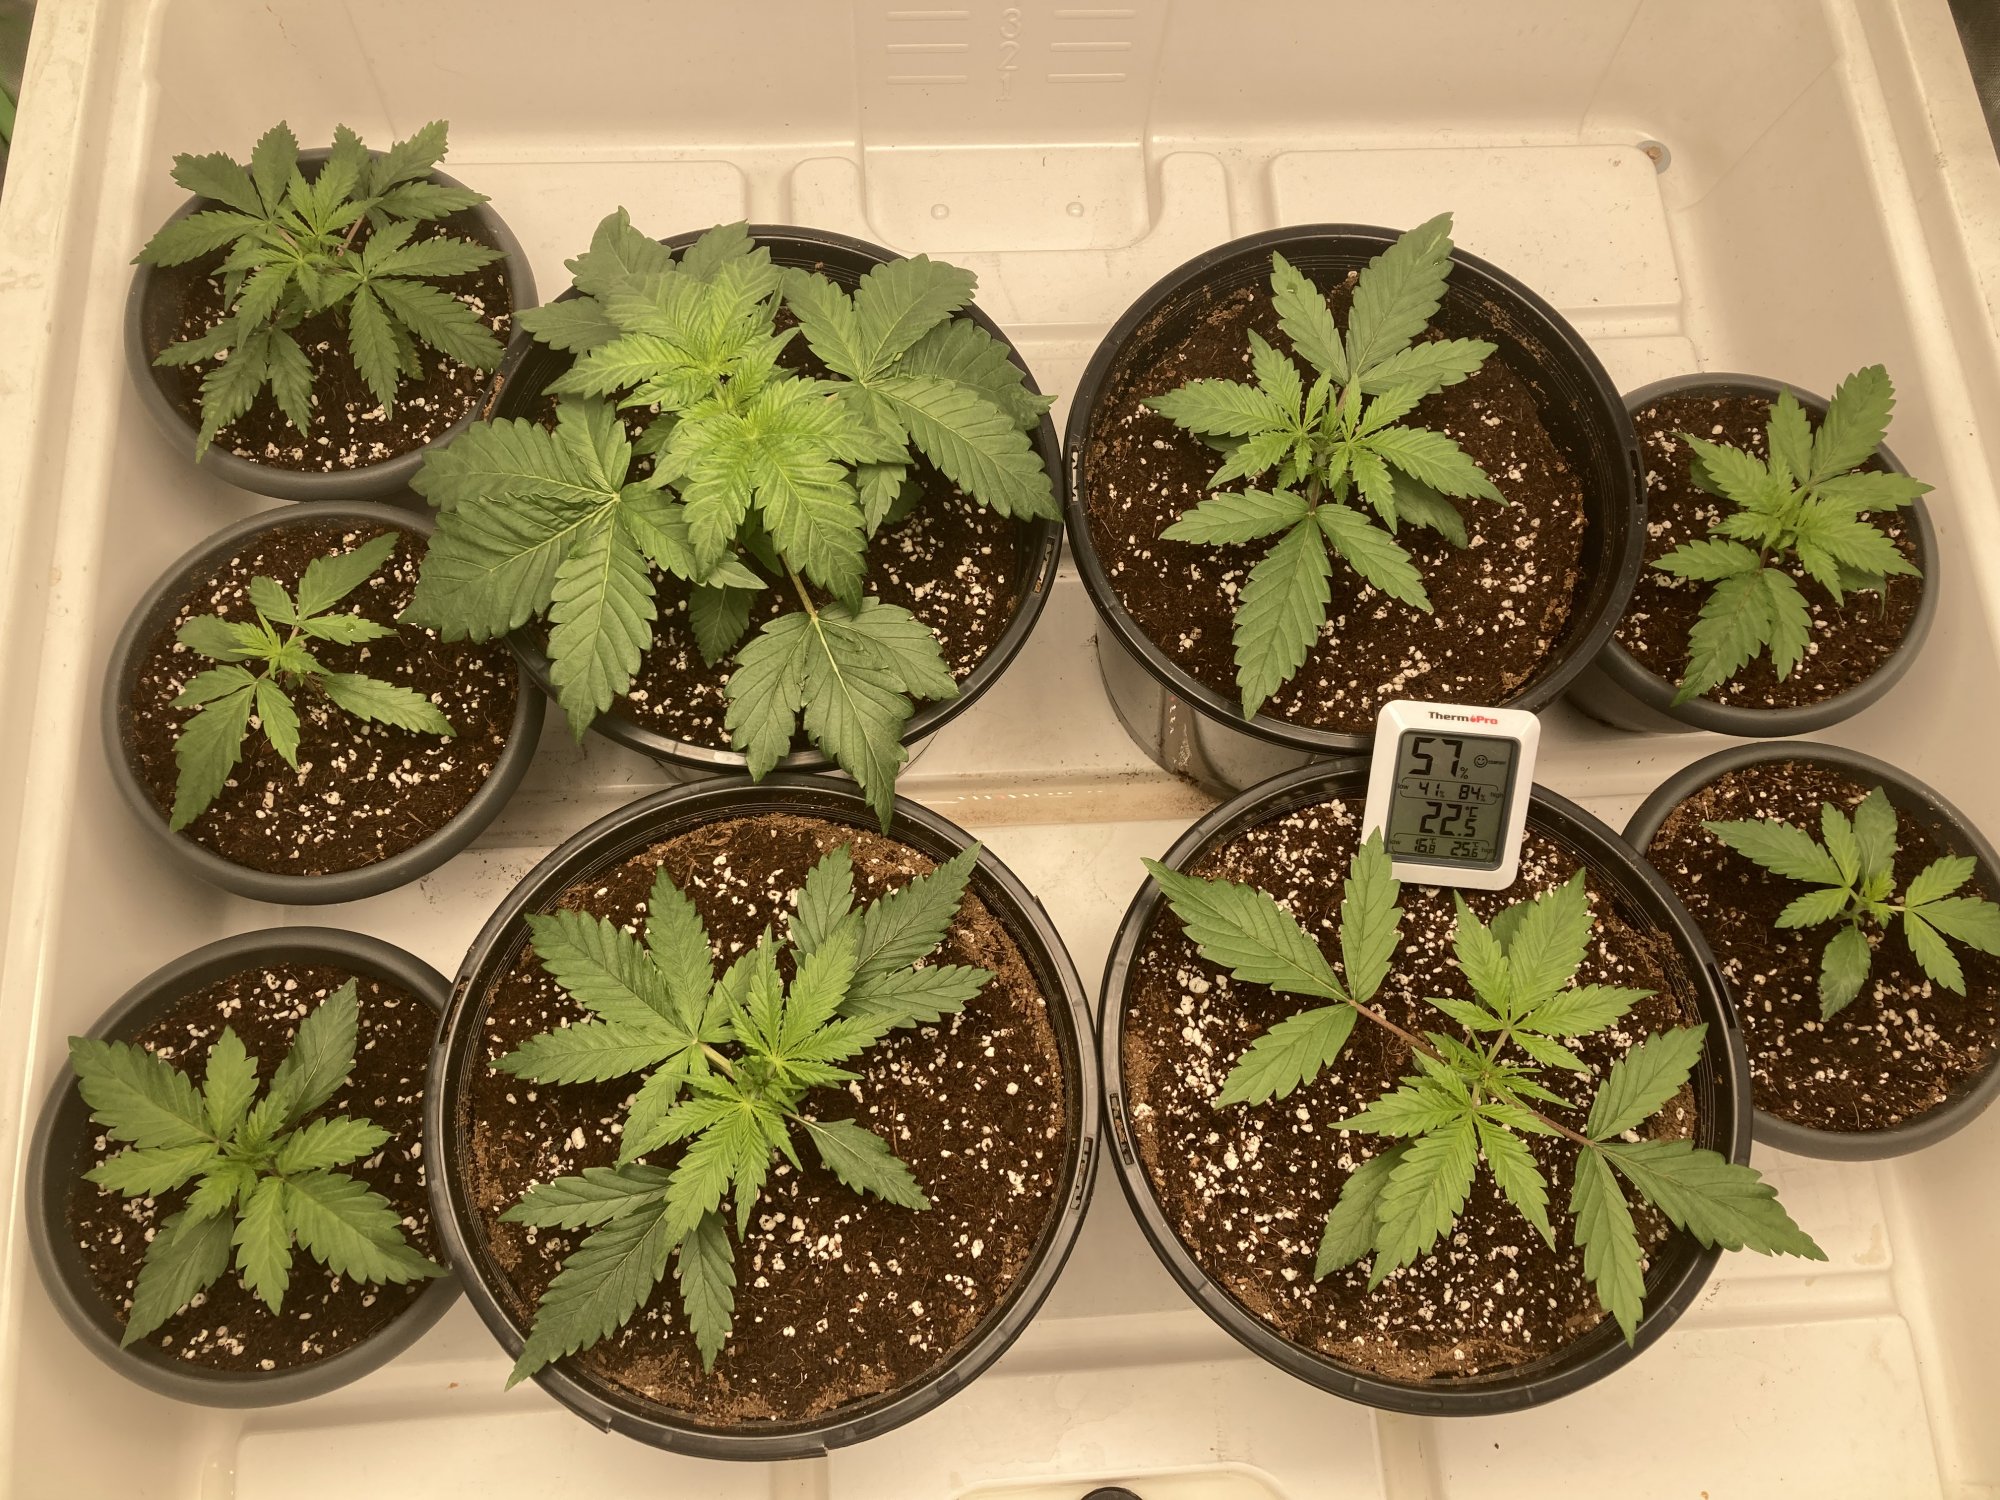 Day 15 from seed   they are powering 3